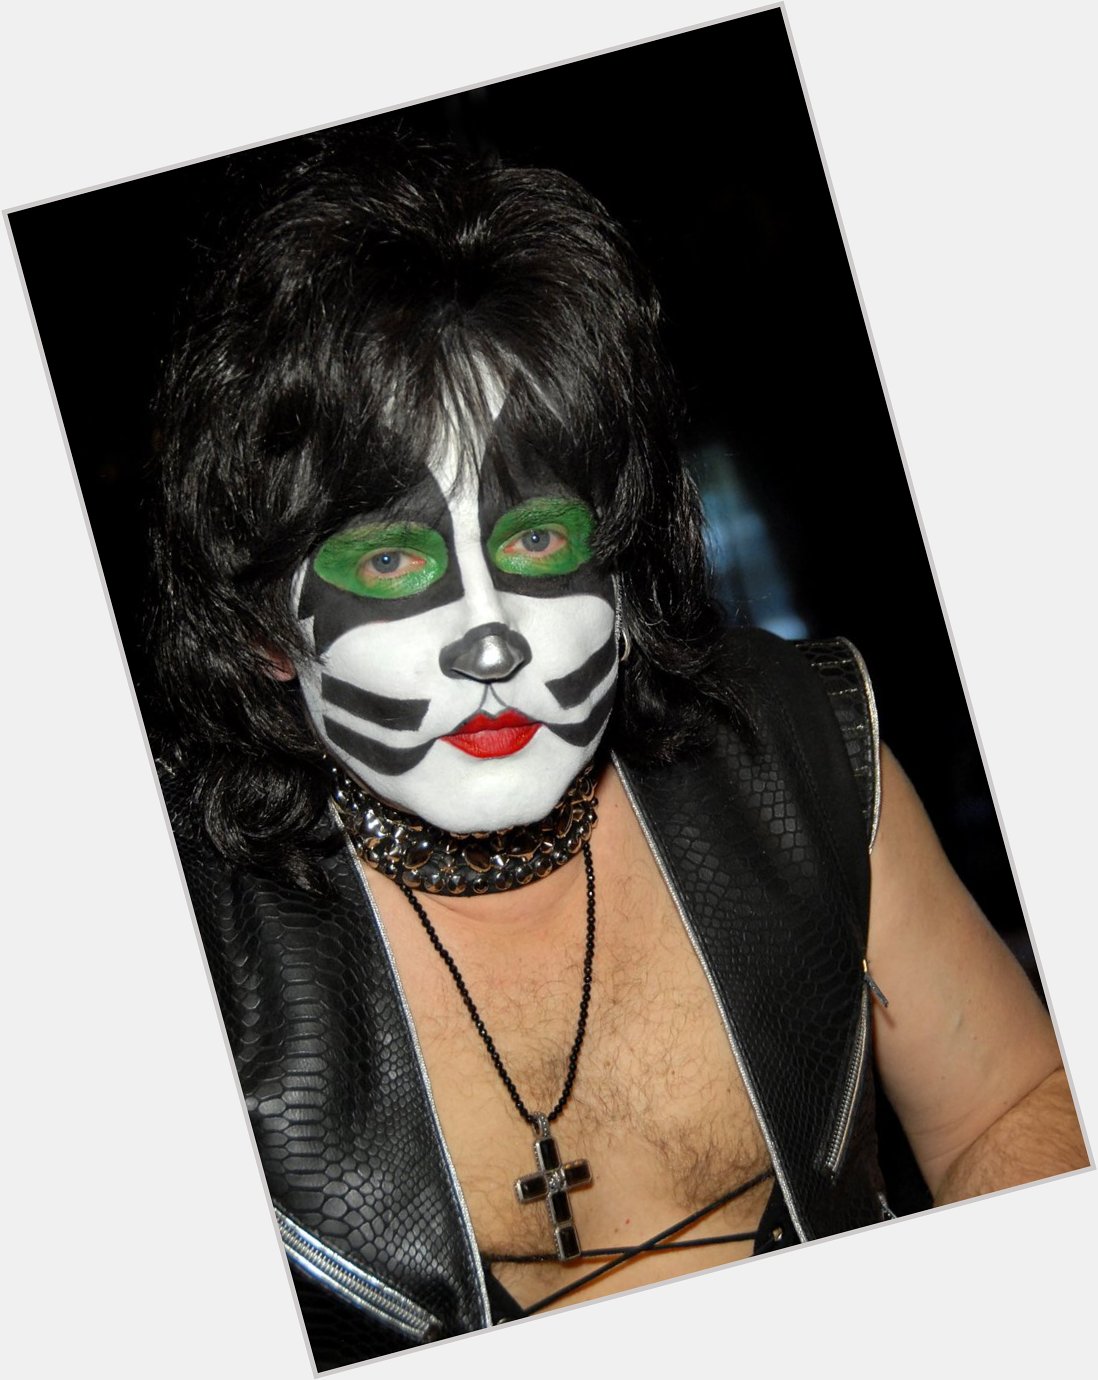 Happy birthday Eric Singer 64 today drummer with Kiss. He debuted with the band on the 1992 album Revenge. 